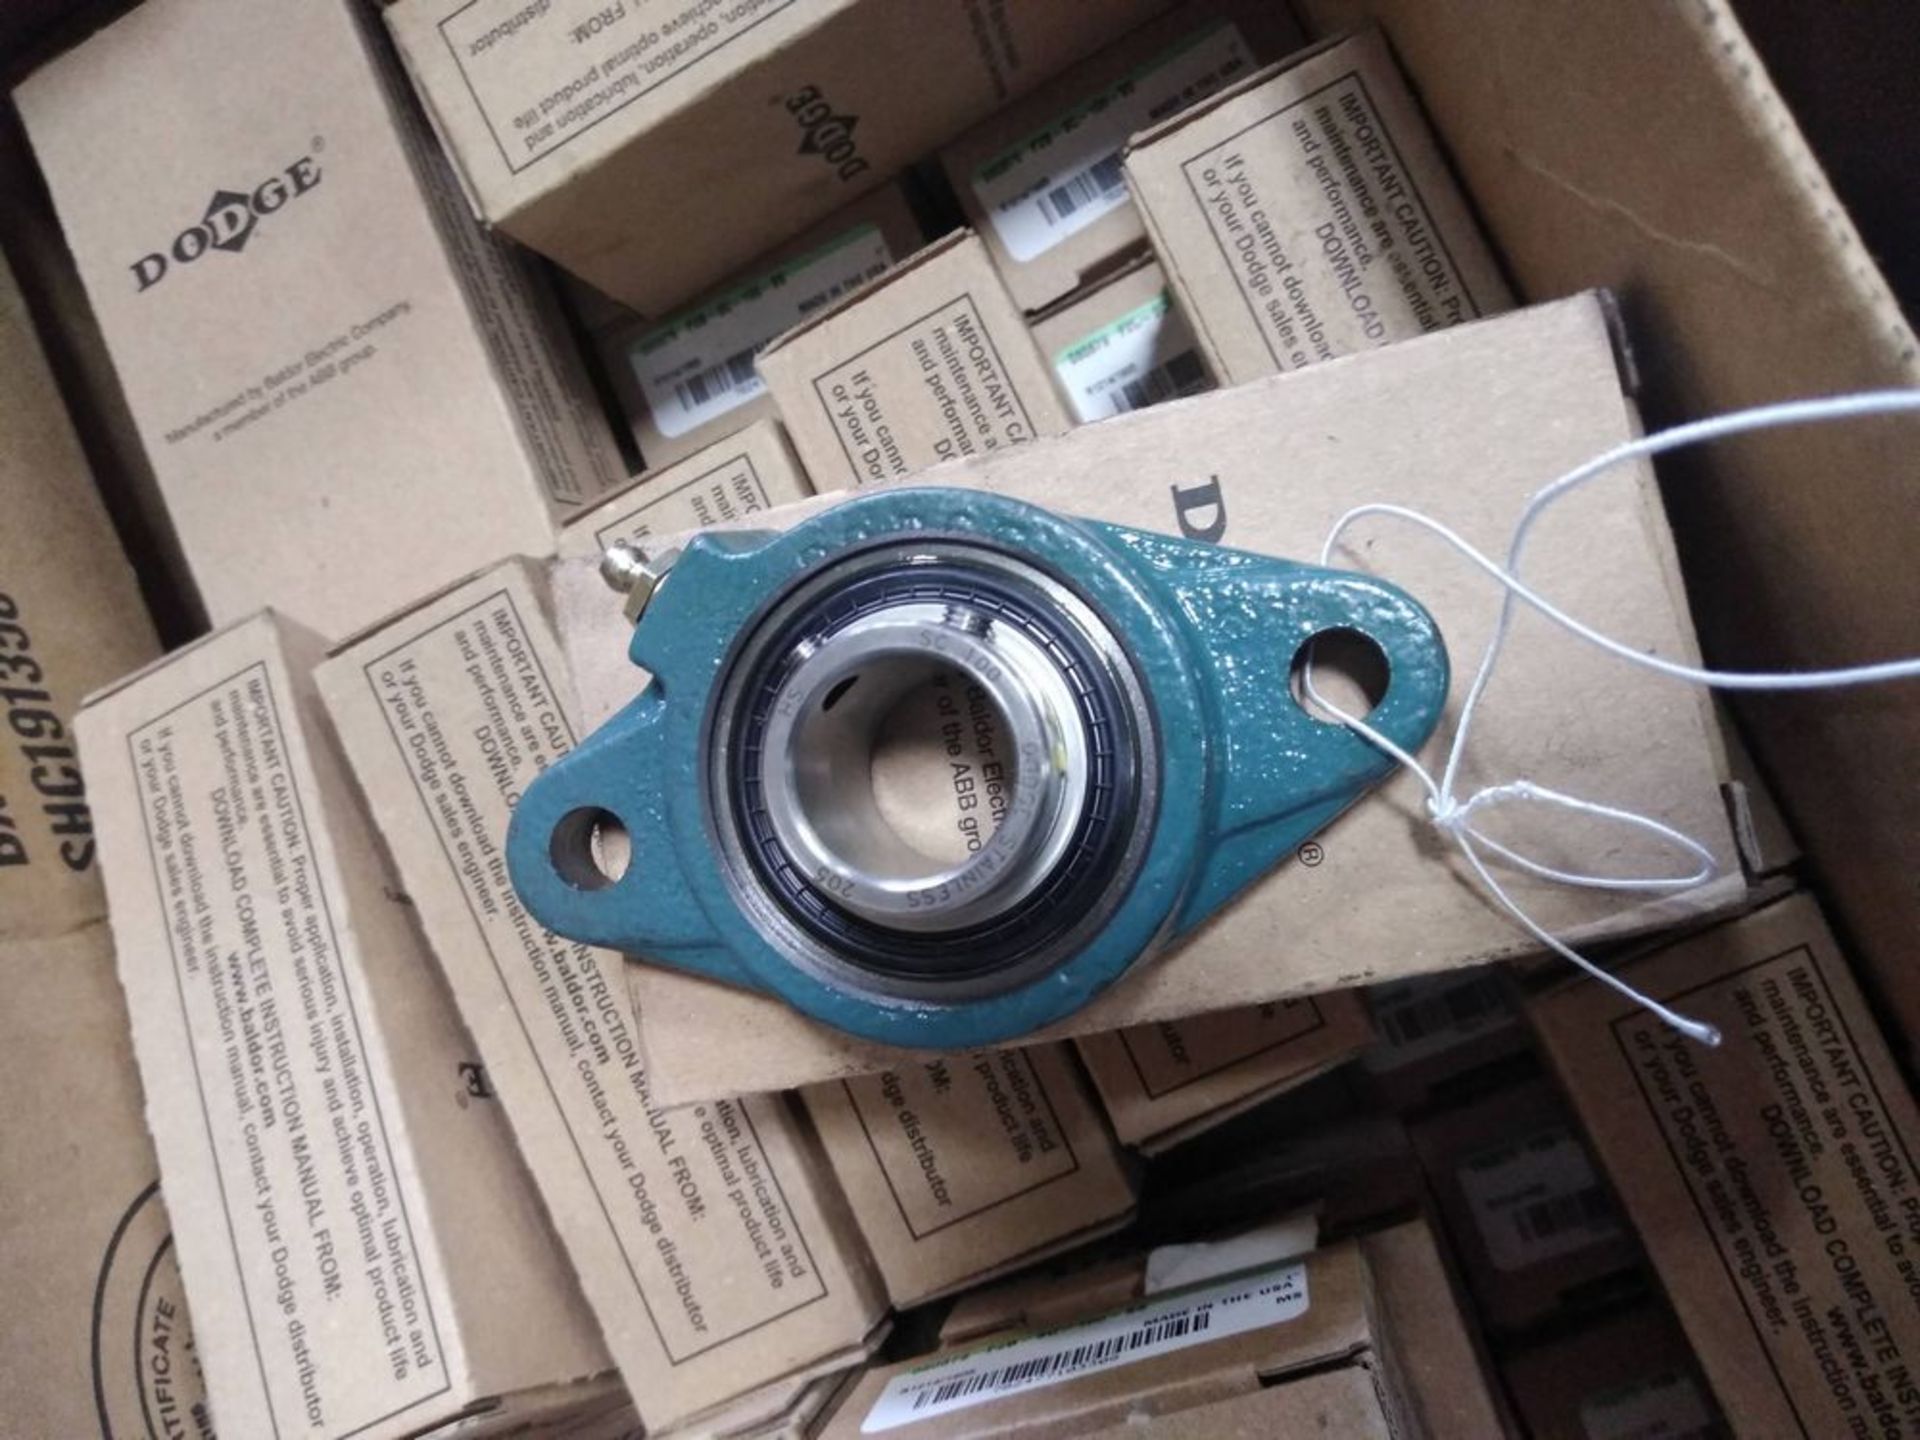 LOT OF 50 DODGE PILLOW BLOCK BEARINGS WITH STAINLESS STEAL INSERT -- Note: This lot is at the 2nd - Image 2 of 3